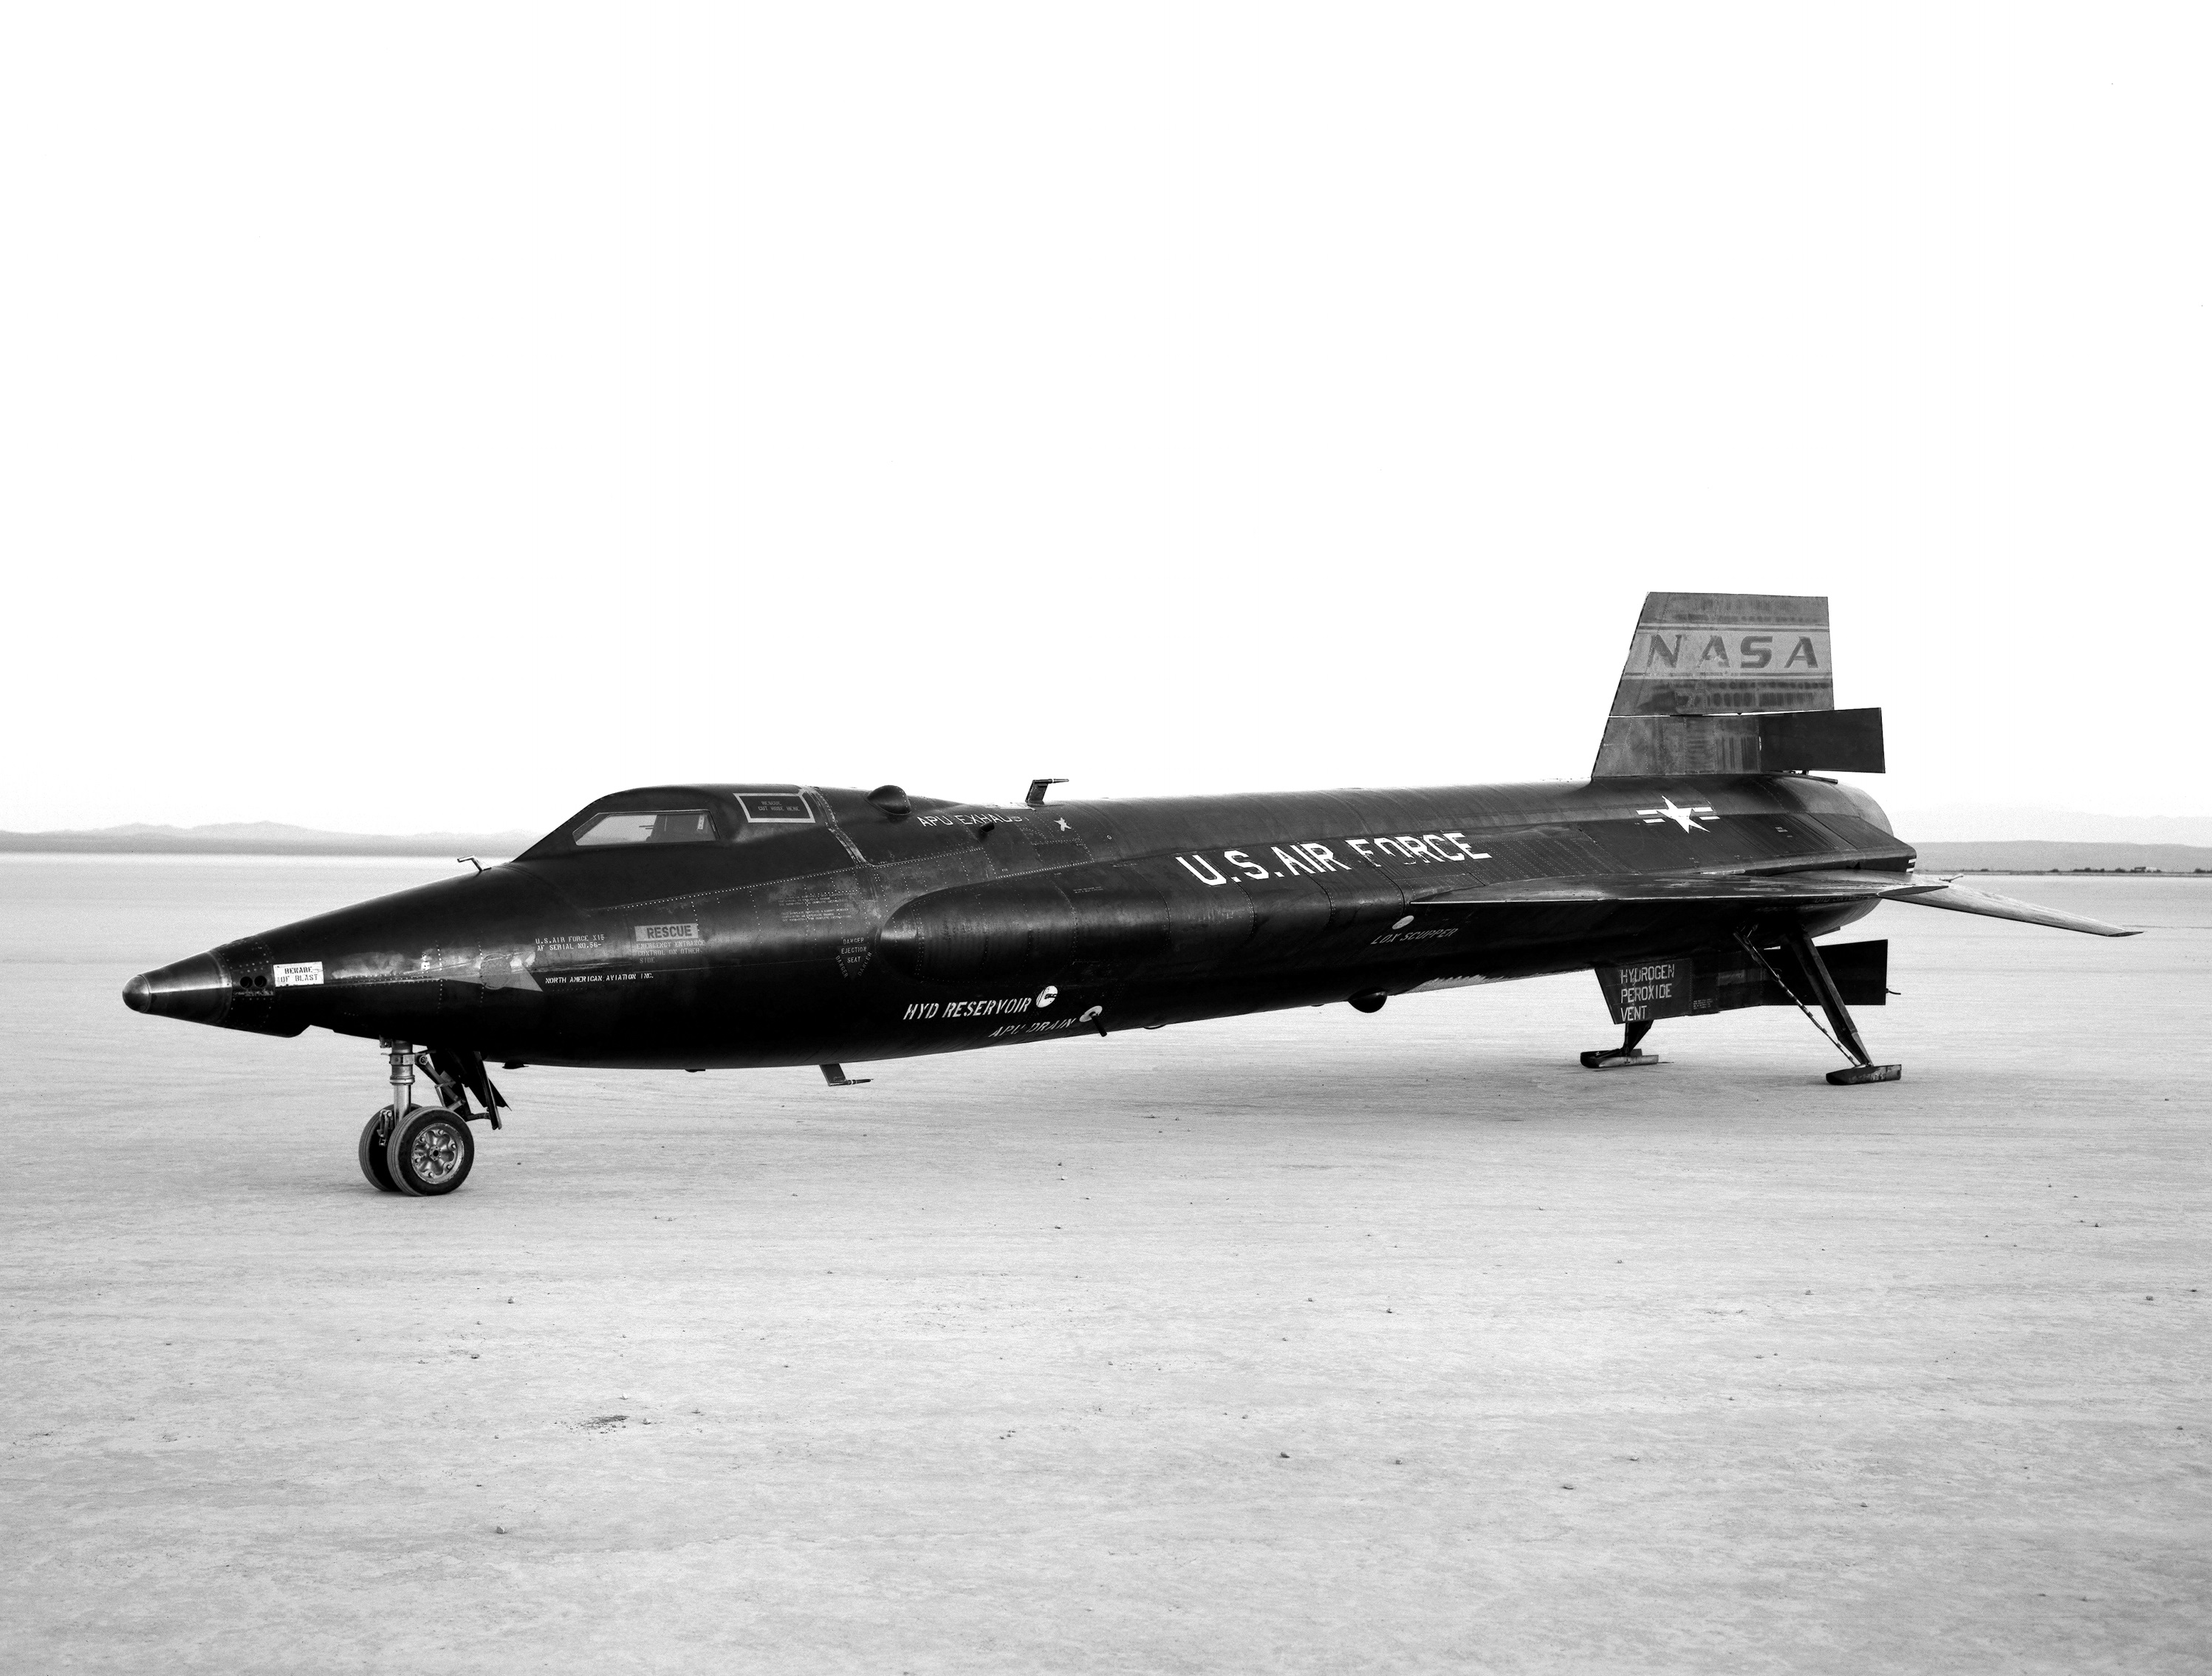 North American Aviation X-15A 56-6672 on Rogers Dry Lake after a flight. (NASA)